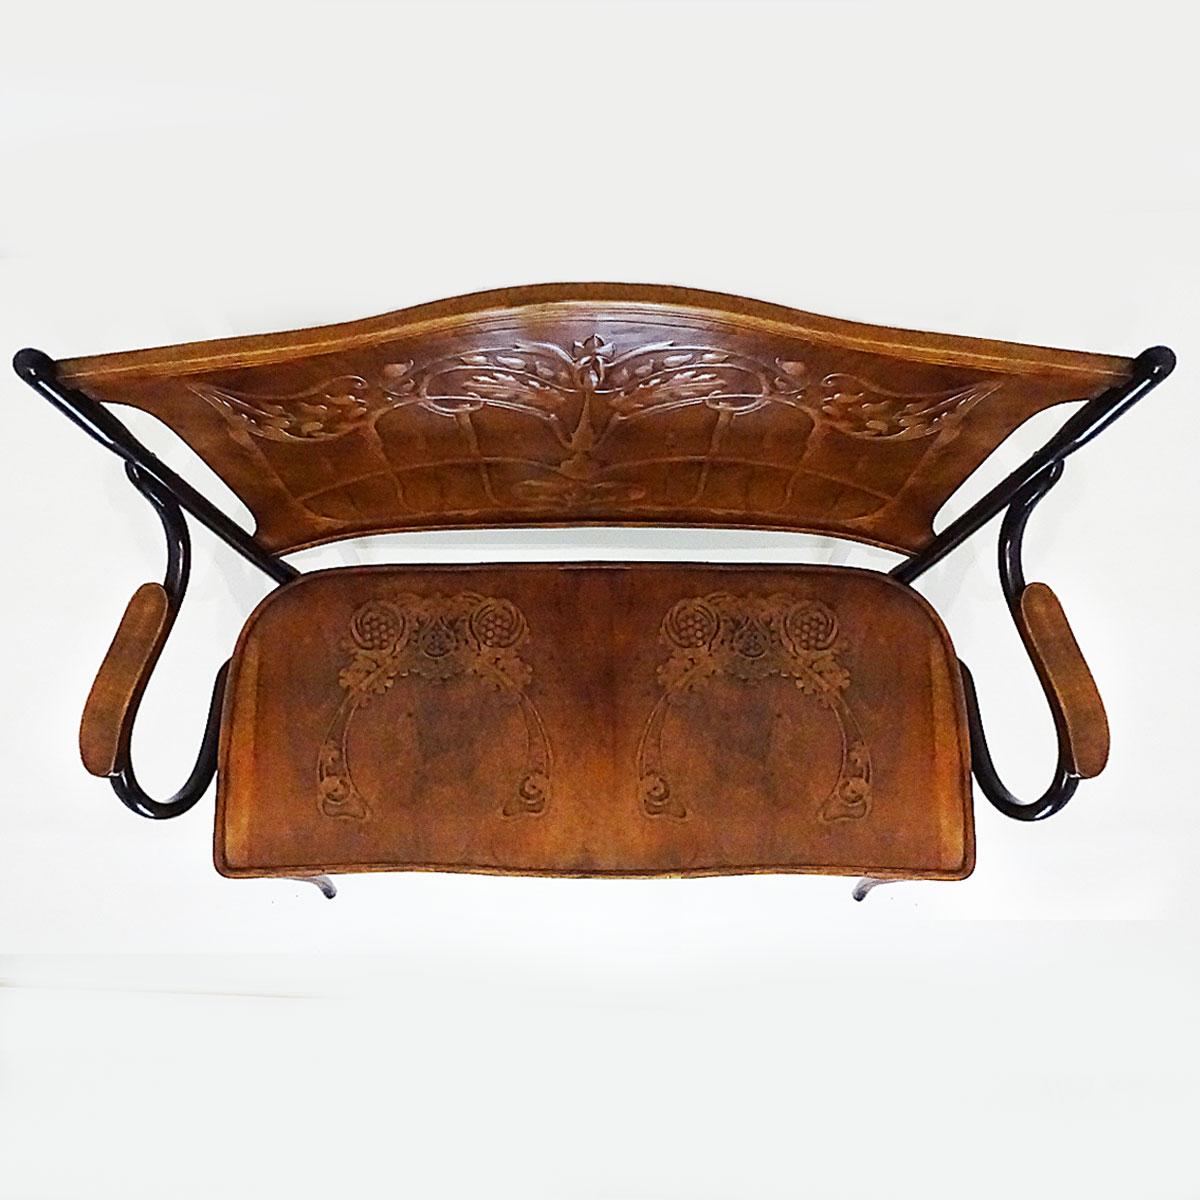 Early 20th Century Antique Embossed Bentwood Bench Attributed to Jacob and Josef Kohn